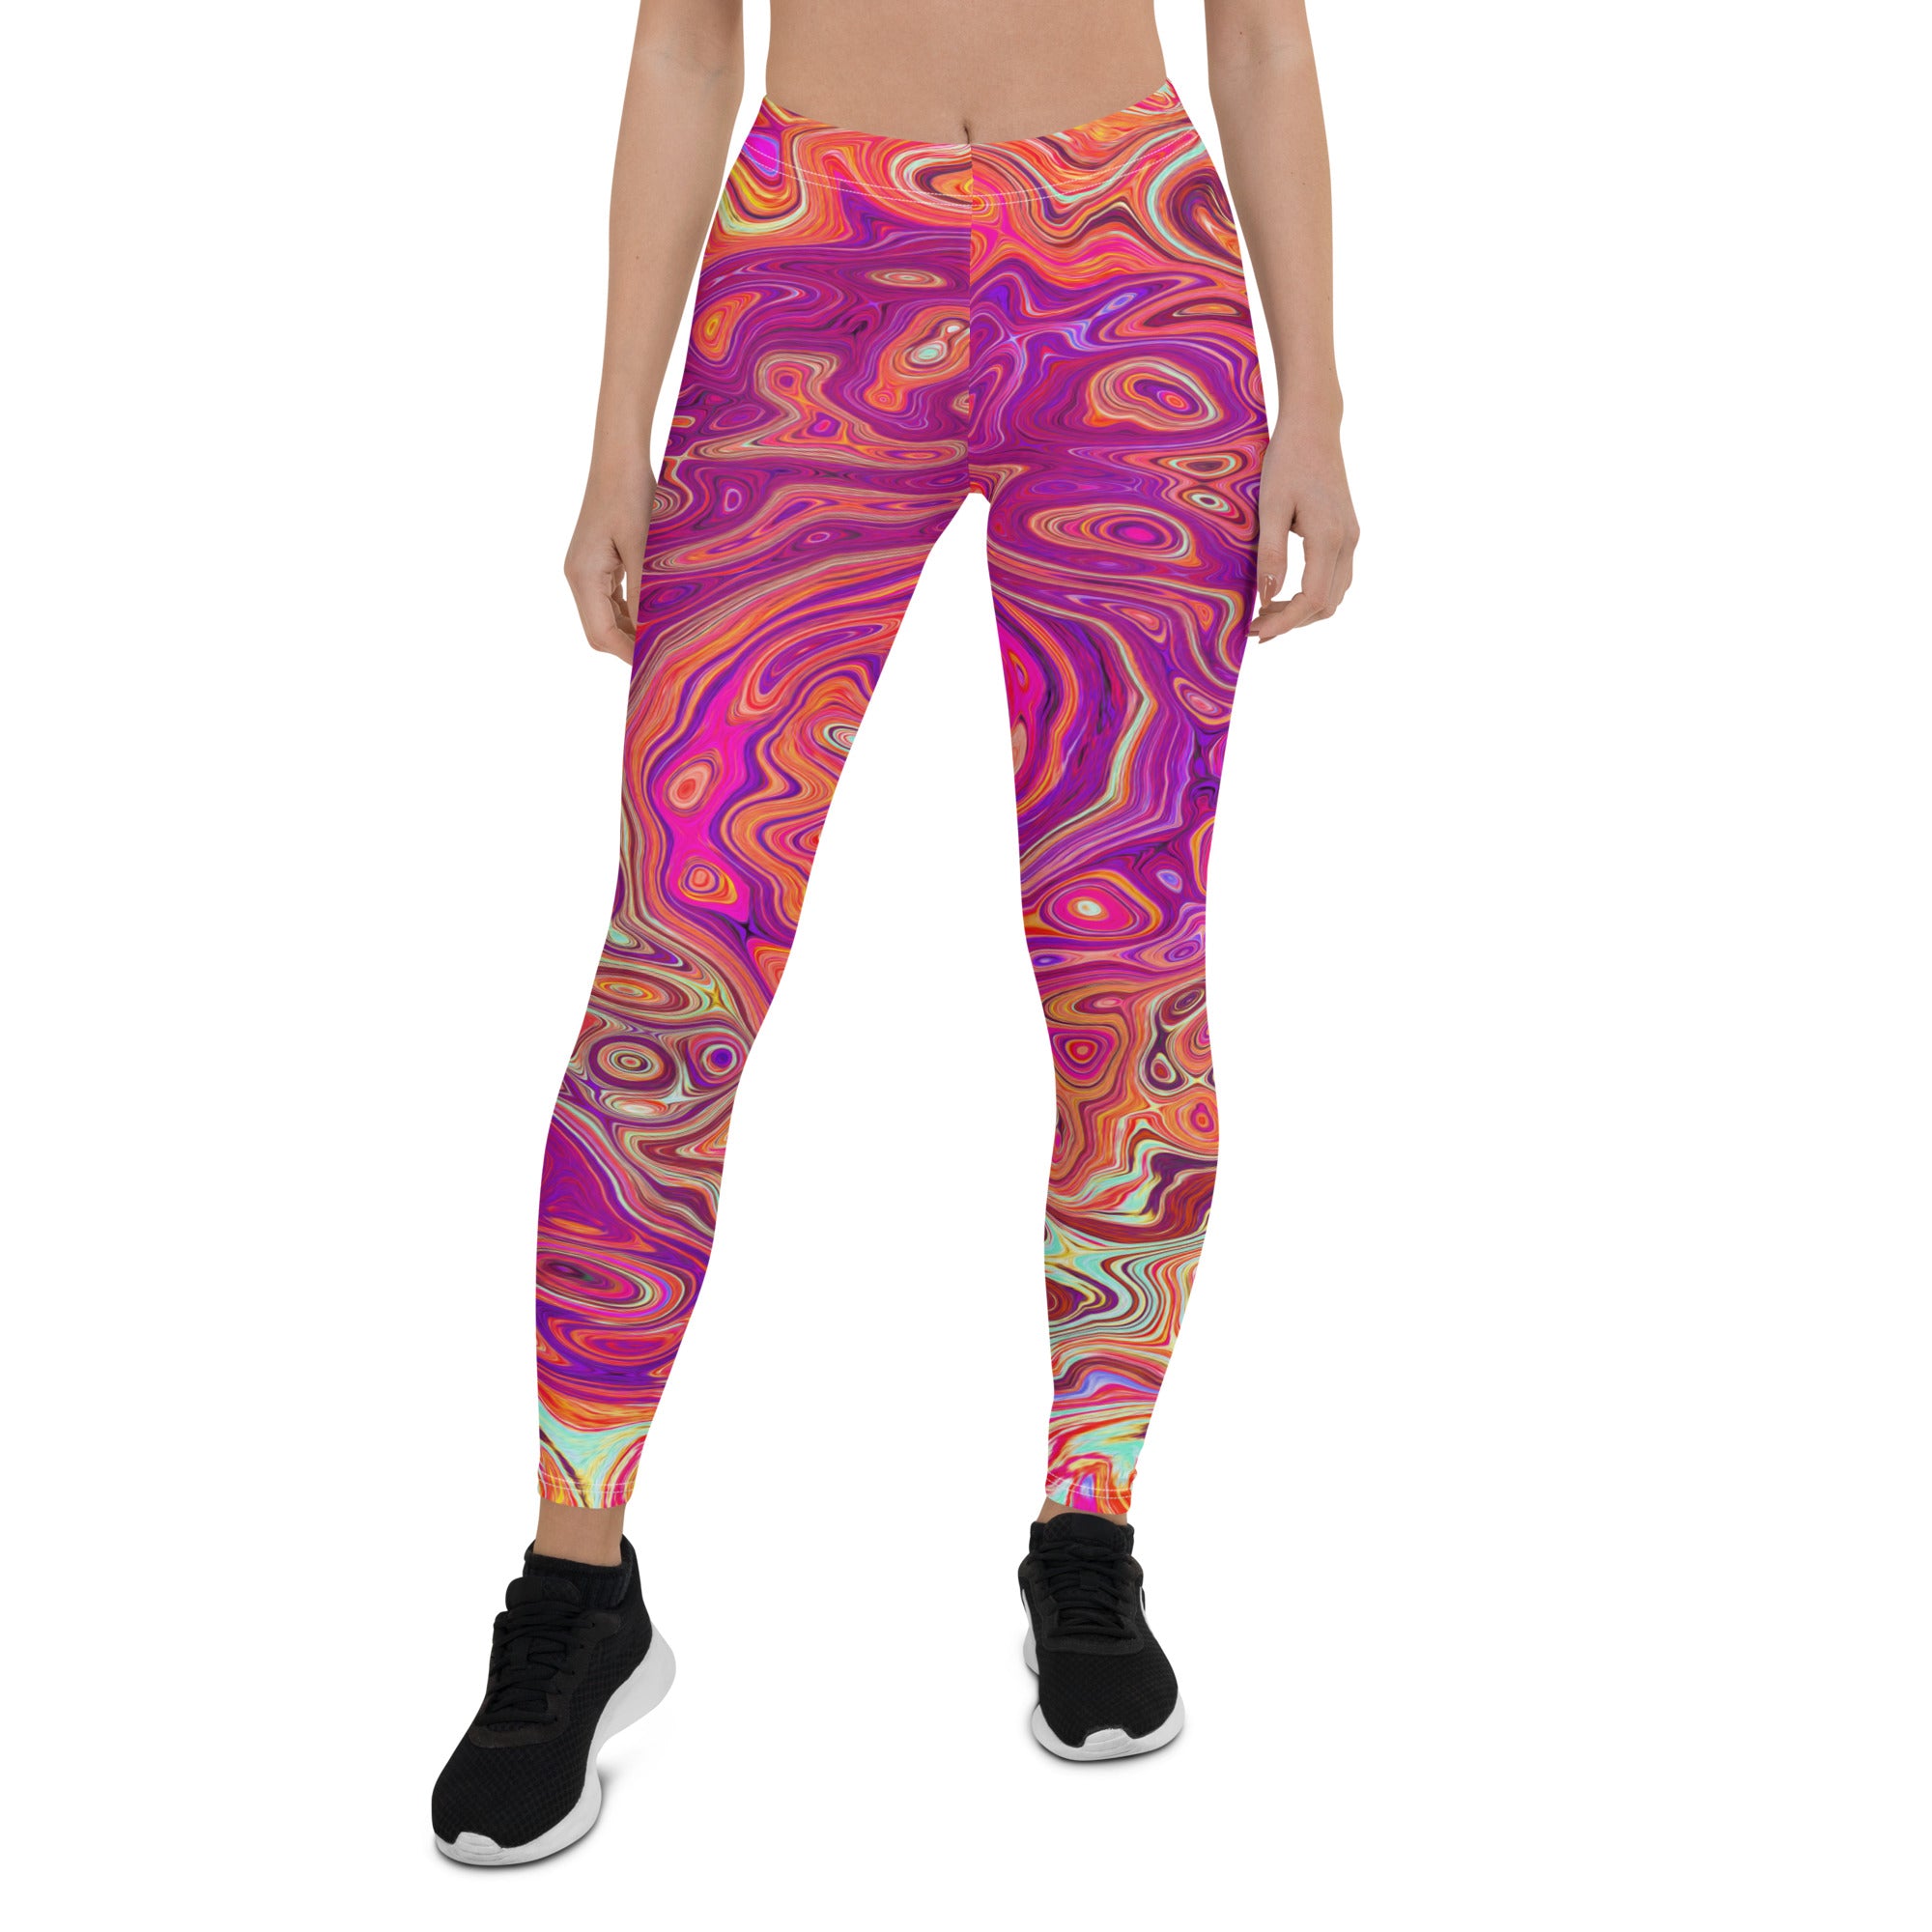 Leggings for Women - Retro Abstract Coral and Purple Marble Swirl